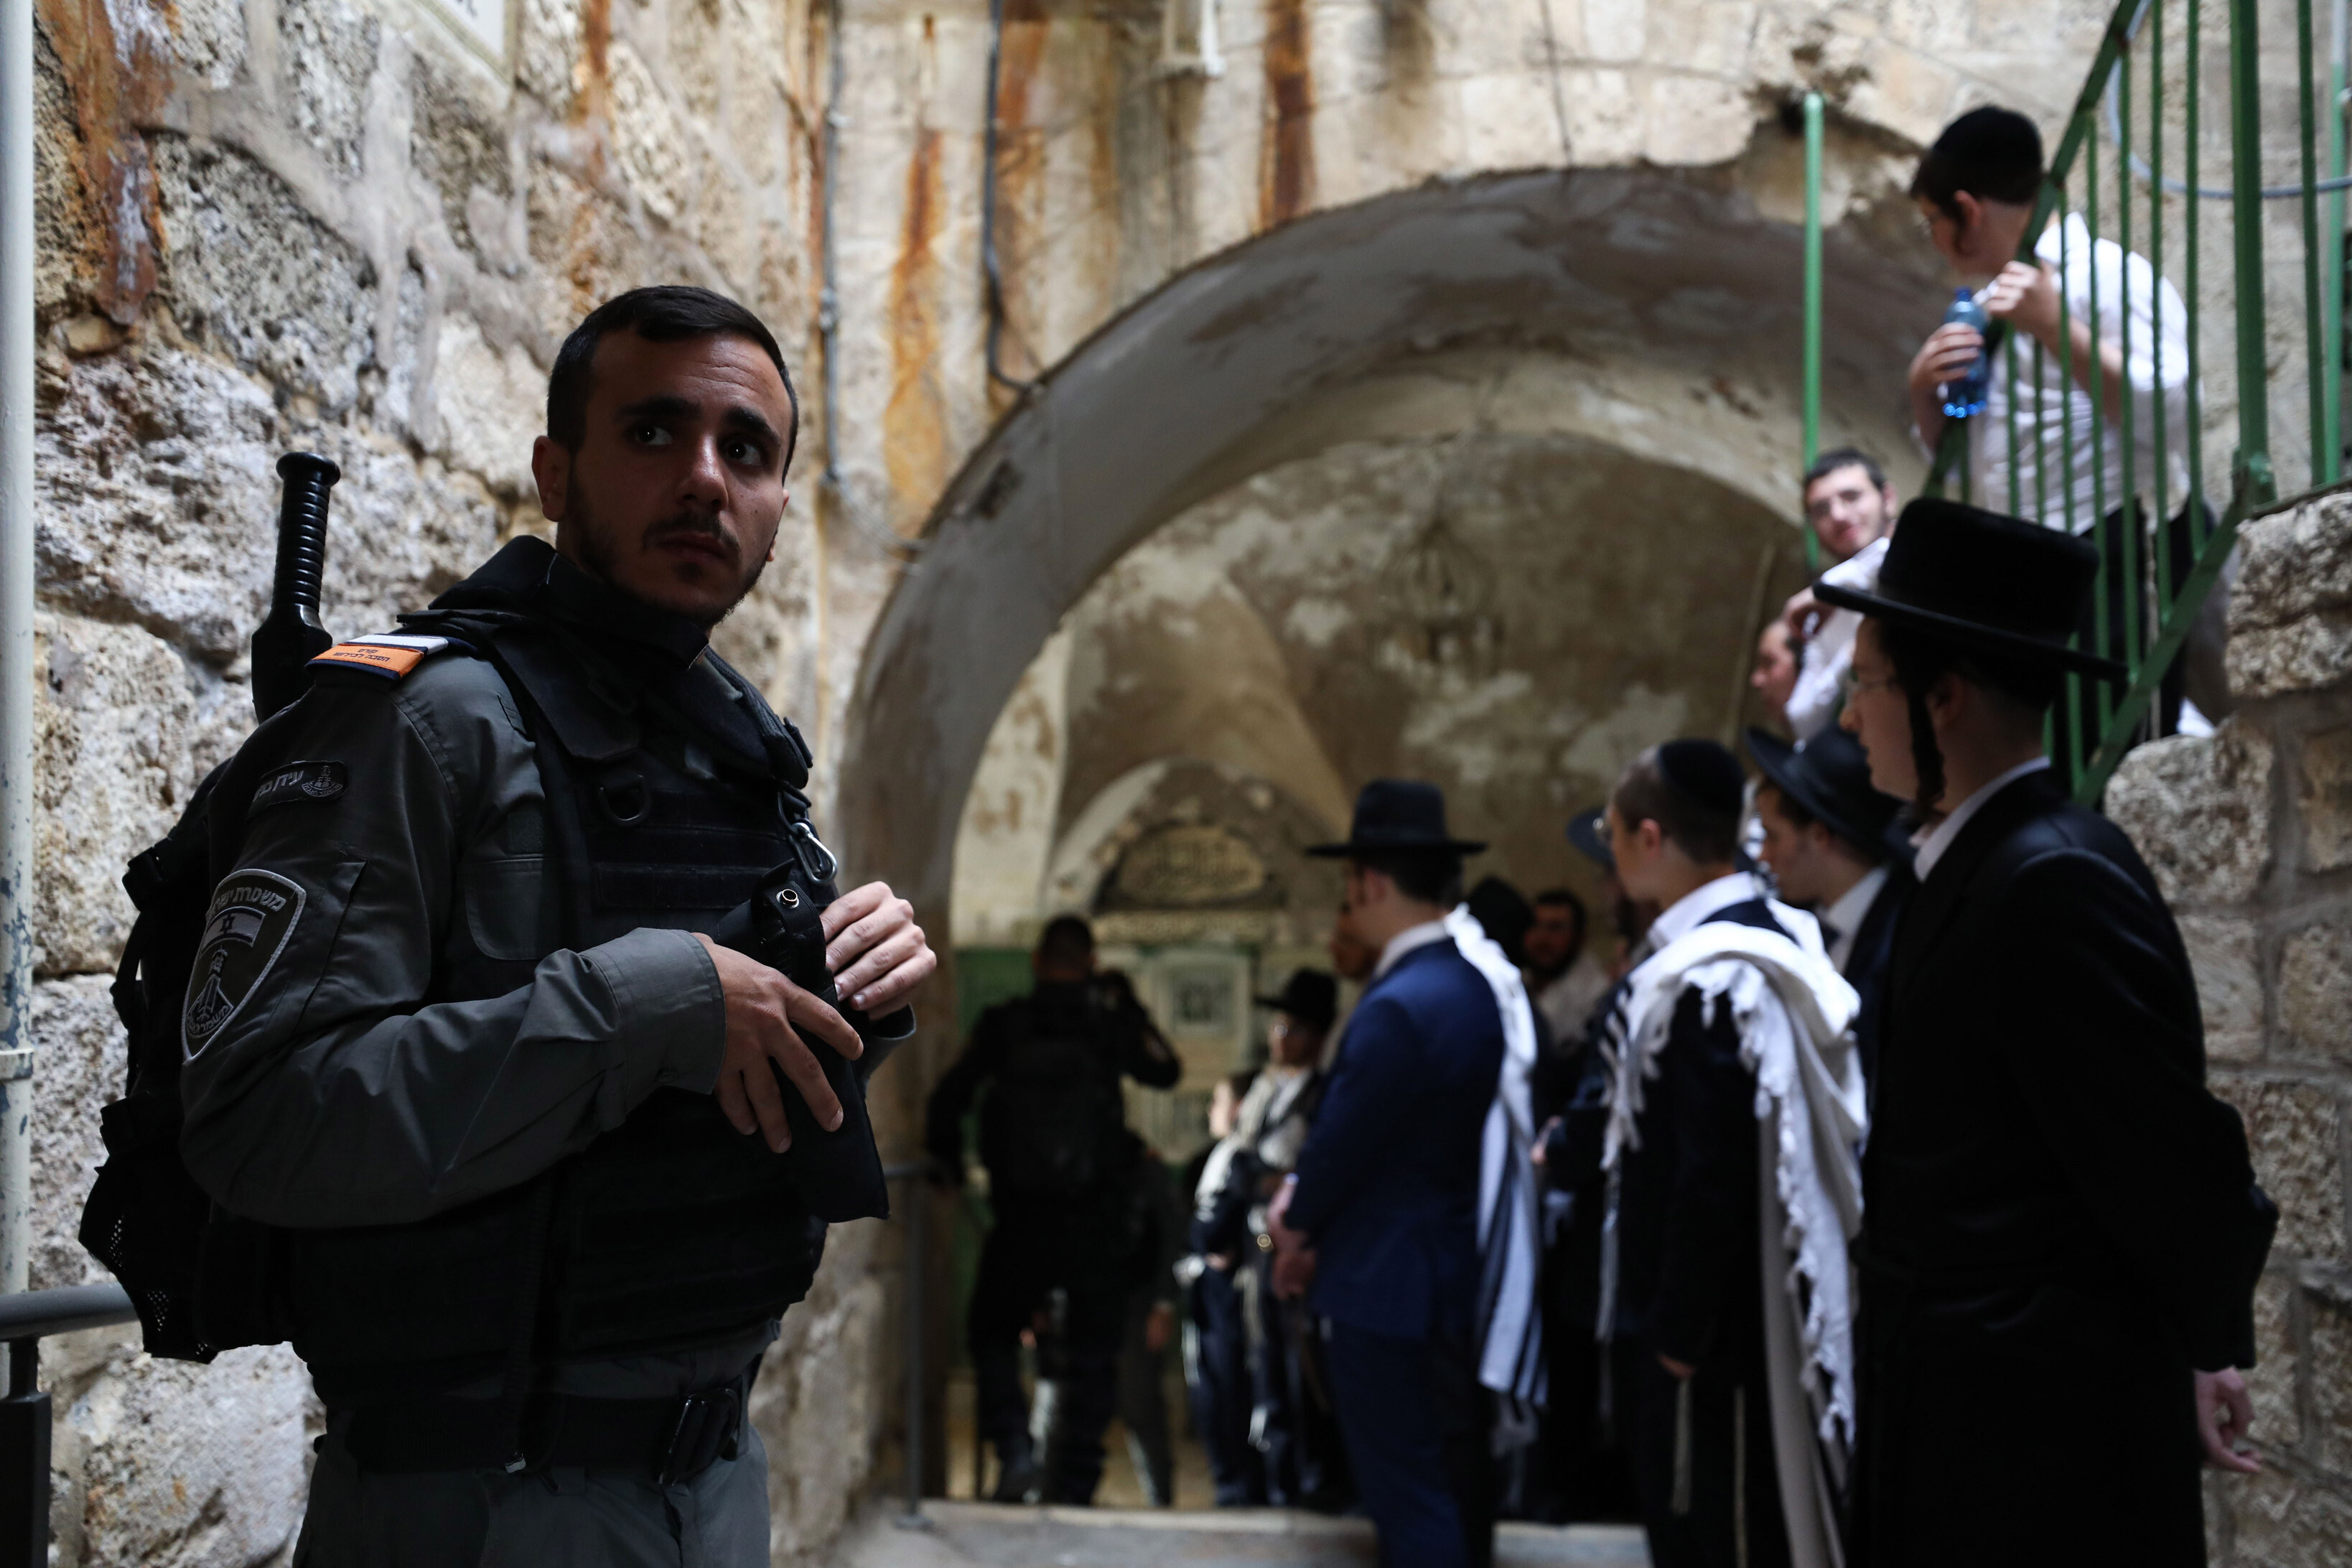 Jewish settlers escorted by Israeli forces enter Al-Aqsa Mosque compound in Jerusalem on April 18.